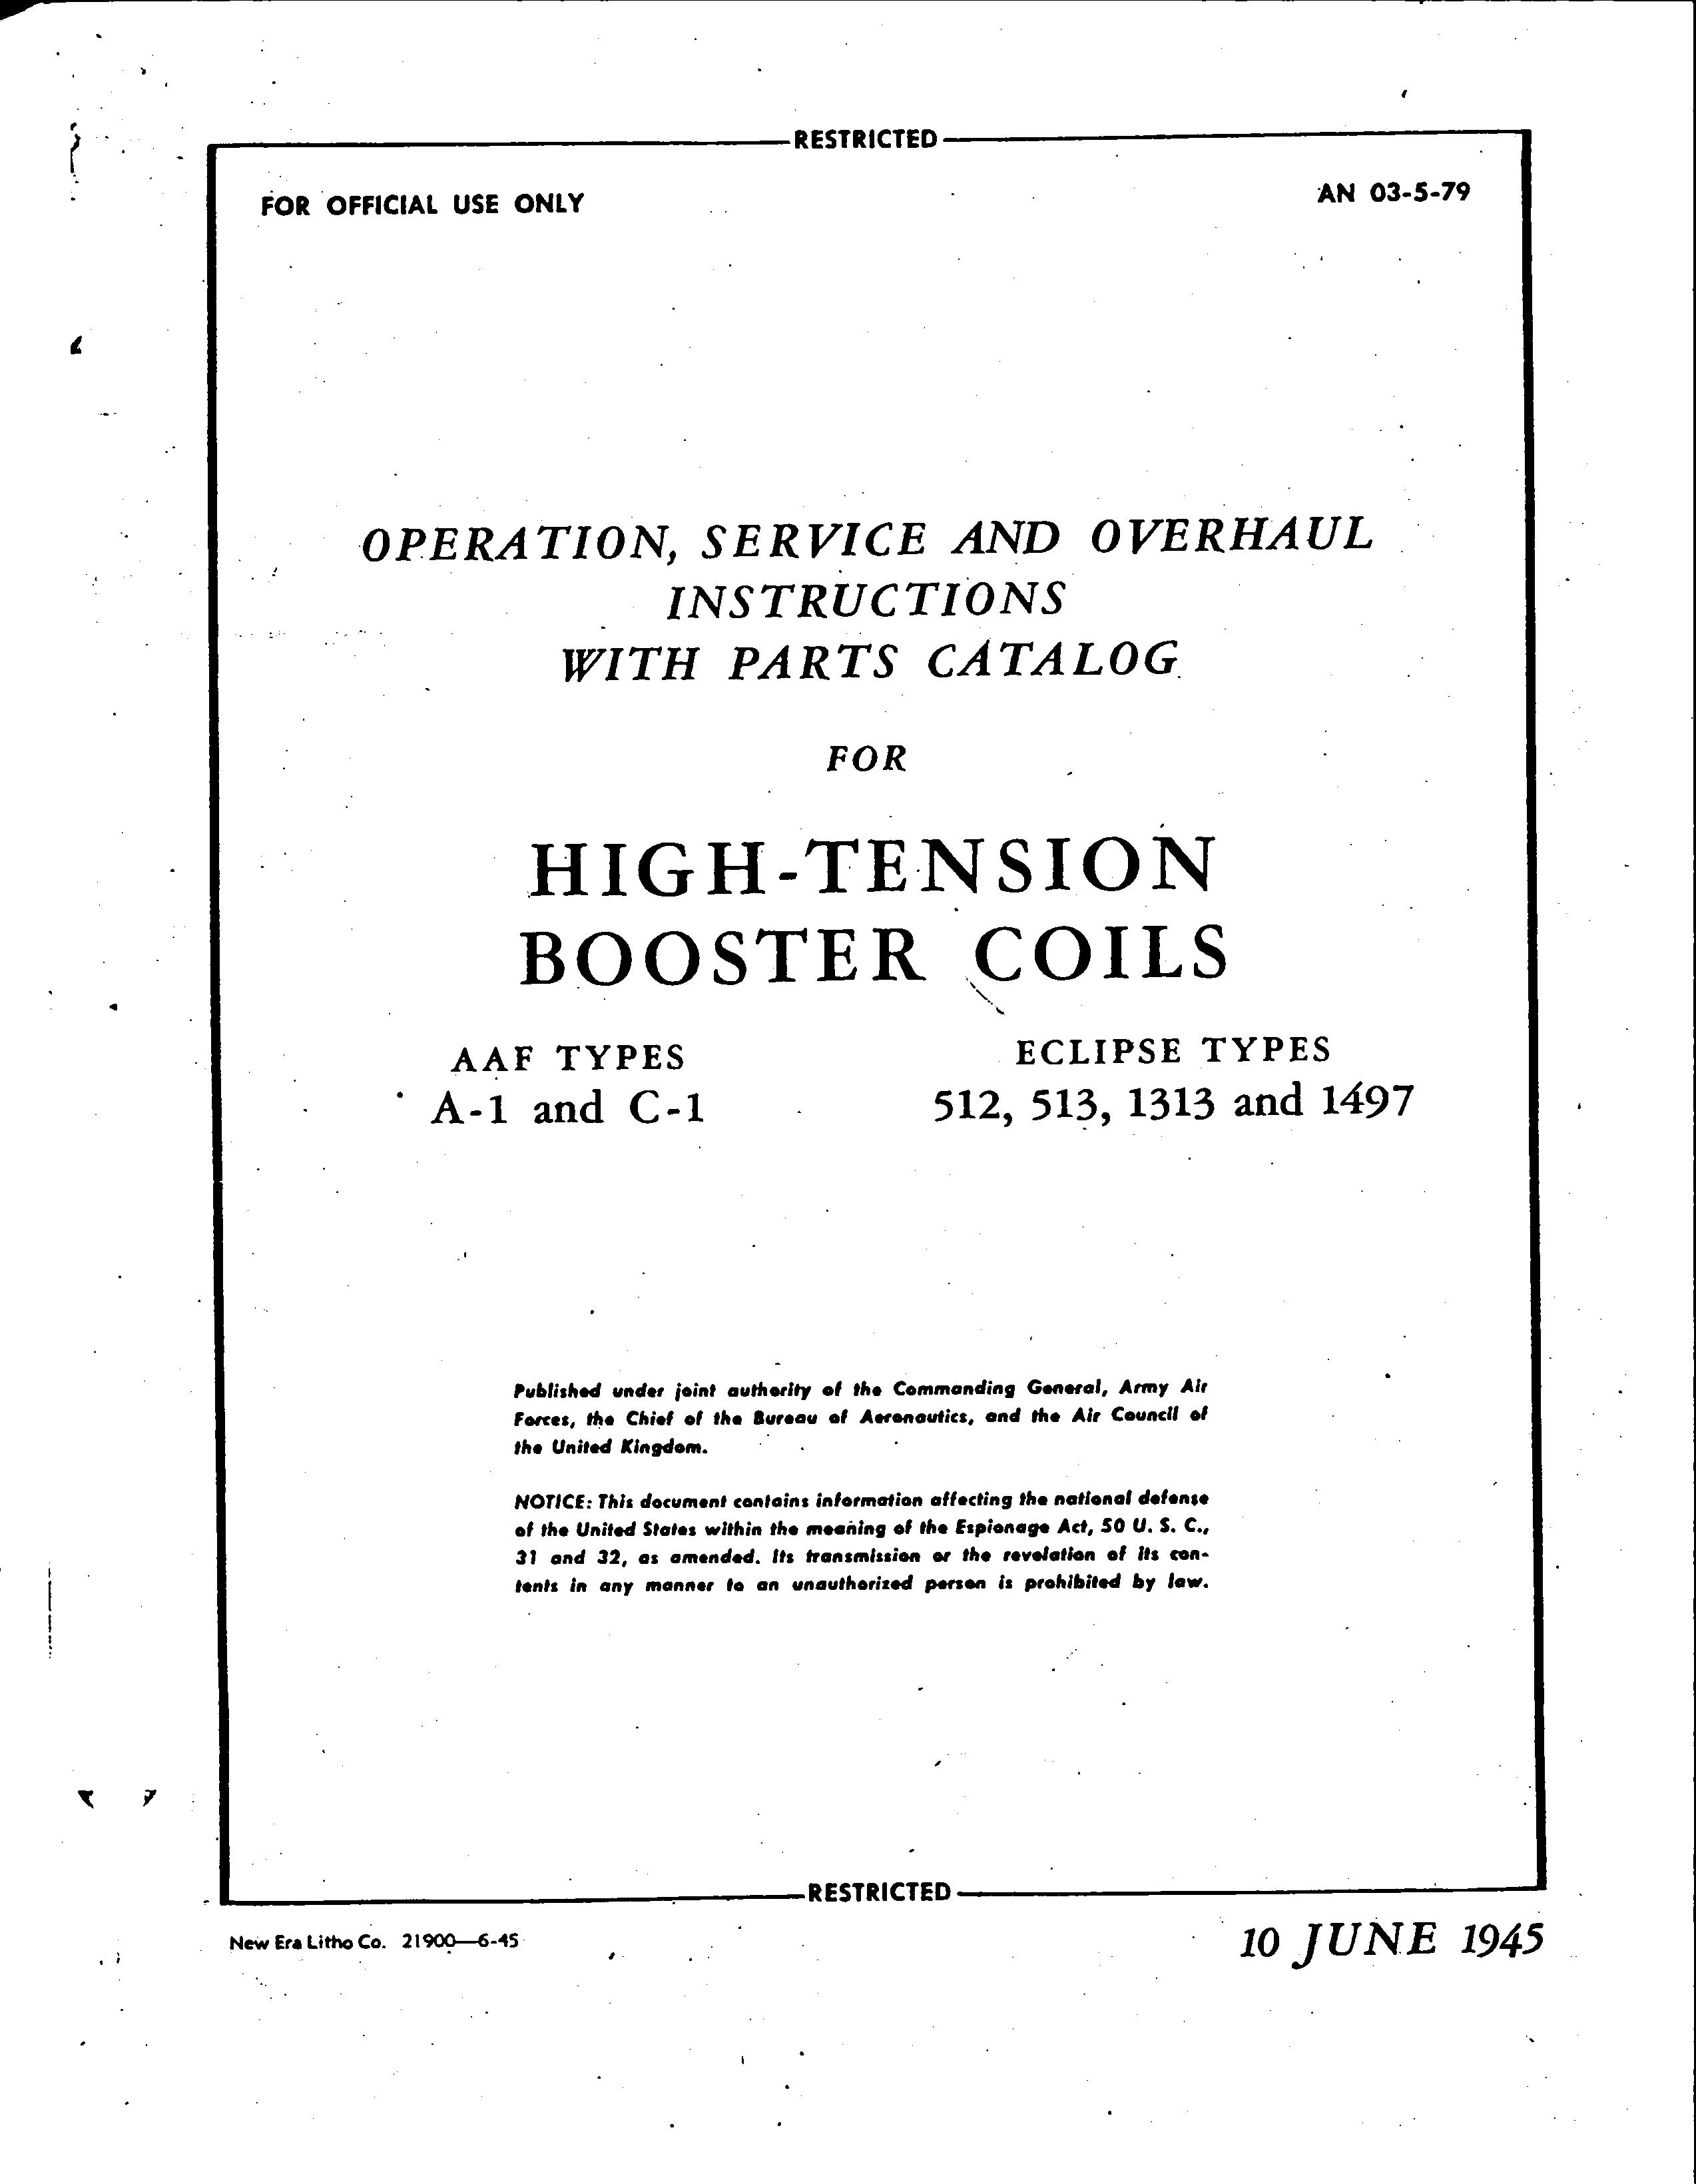 Sample page 1 from AirCorps Library document: Service and Instructions for High-Tension Booster Coils